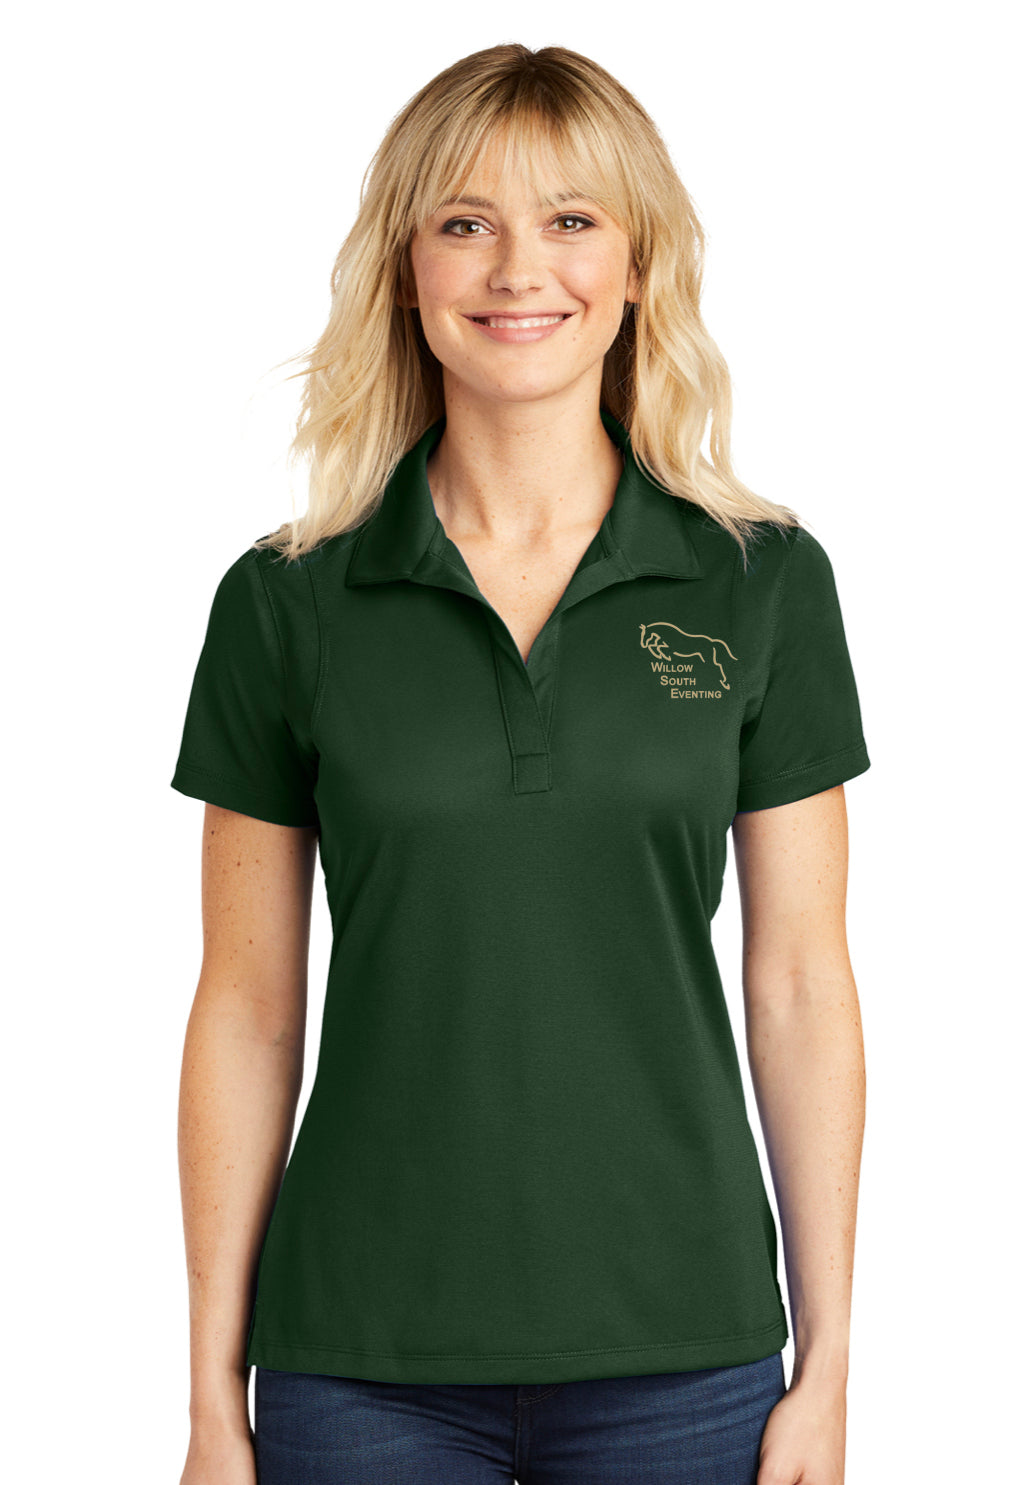 Willow South Eventing Sport-Tek® Ladies Sport-Wick® Polo